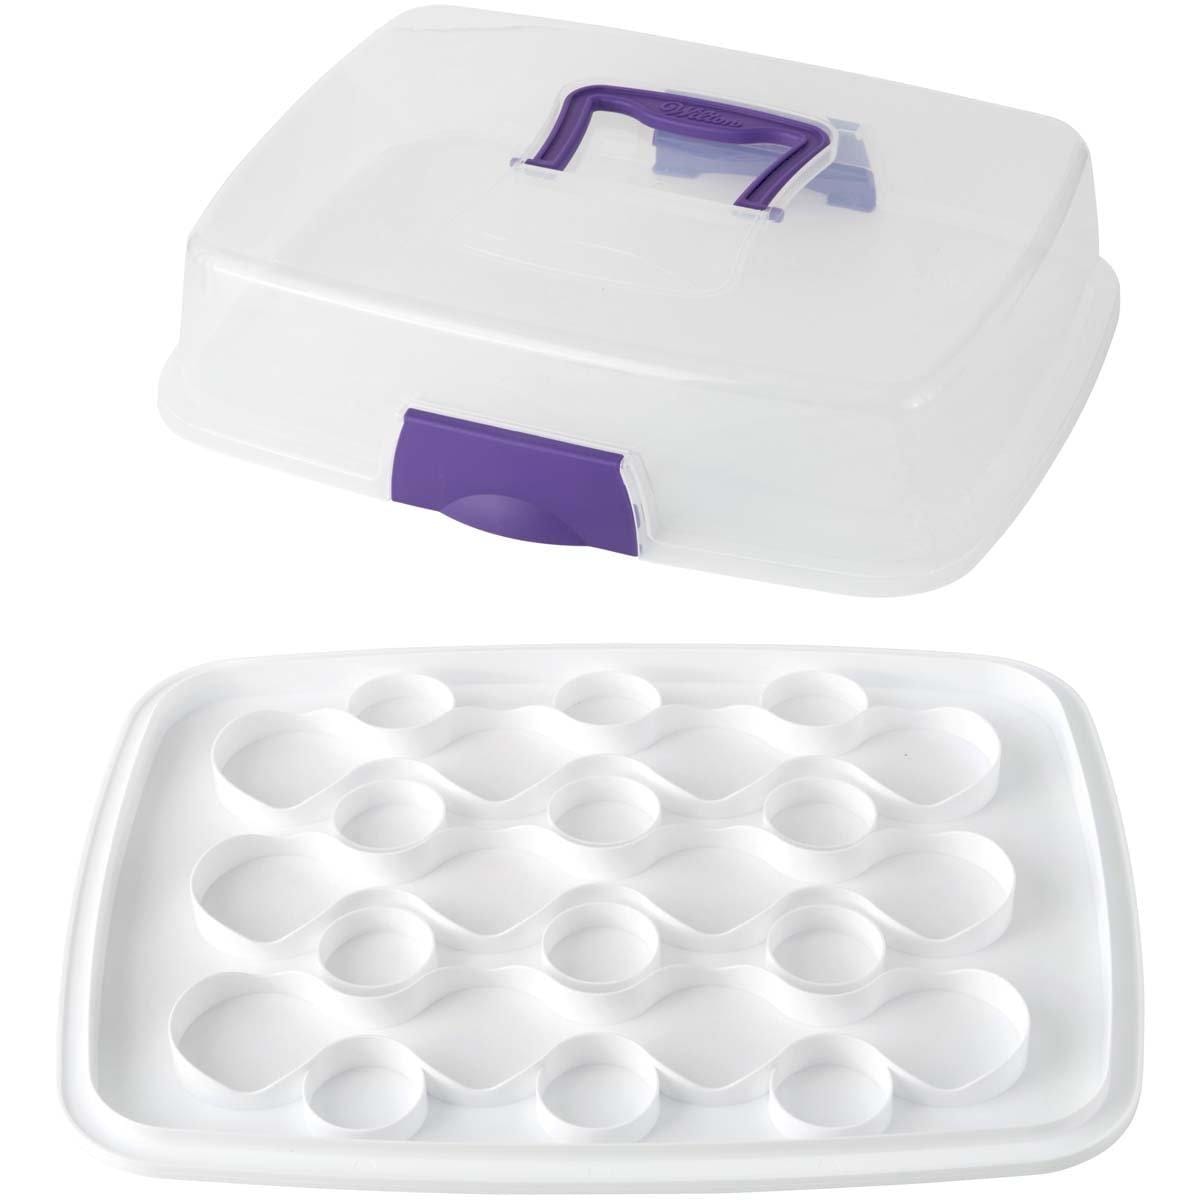 Buy Cake Supplies 3 In 1 Caddy sold at Party Expert